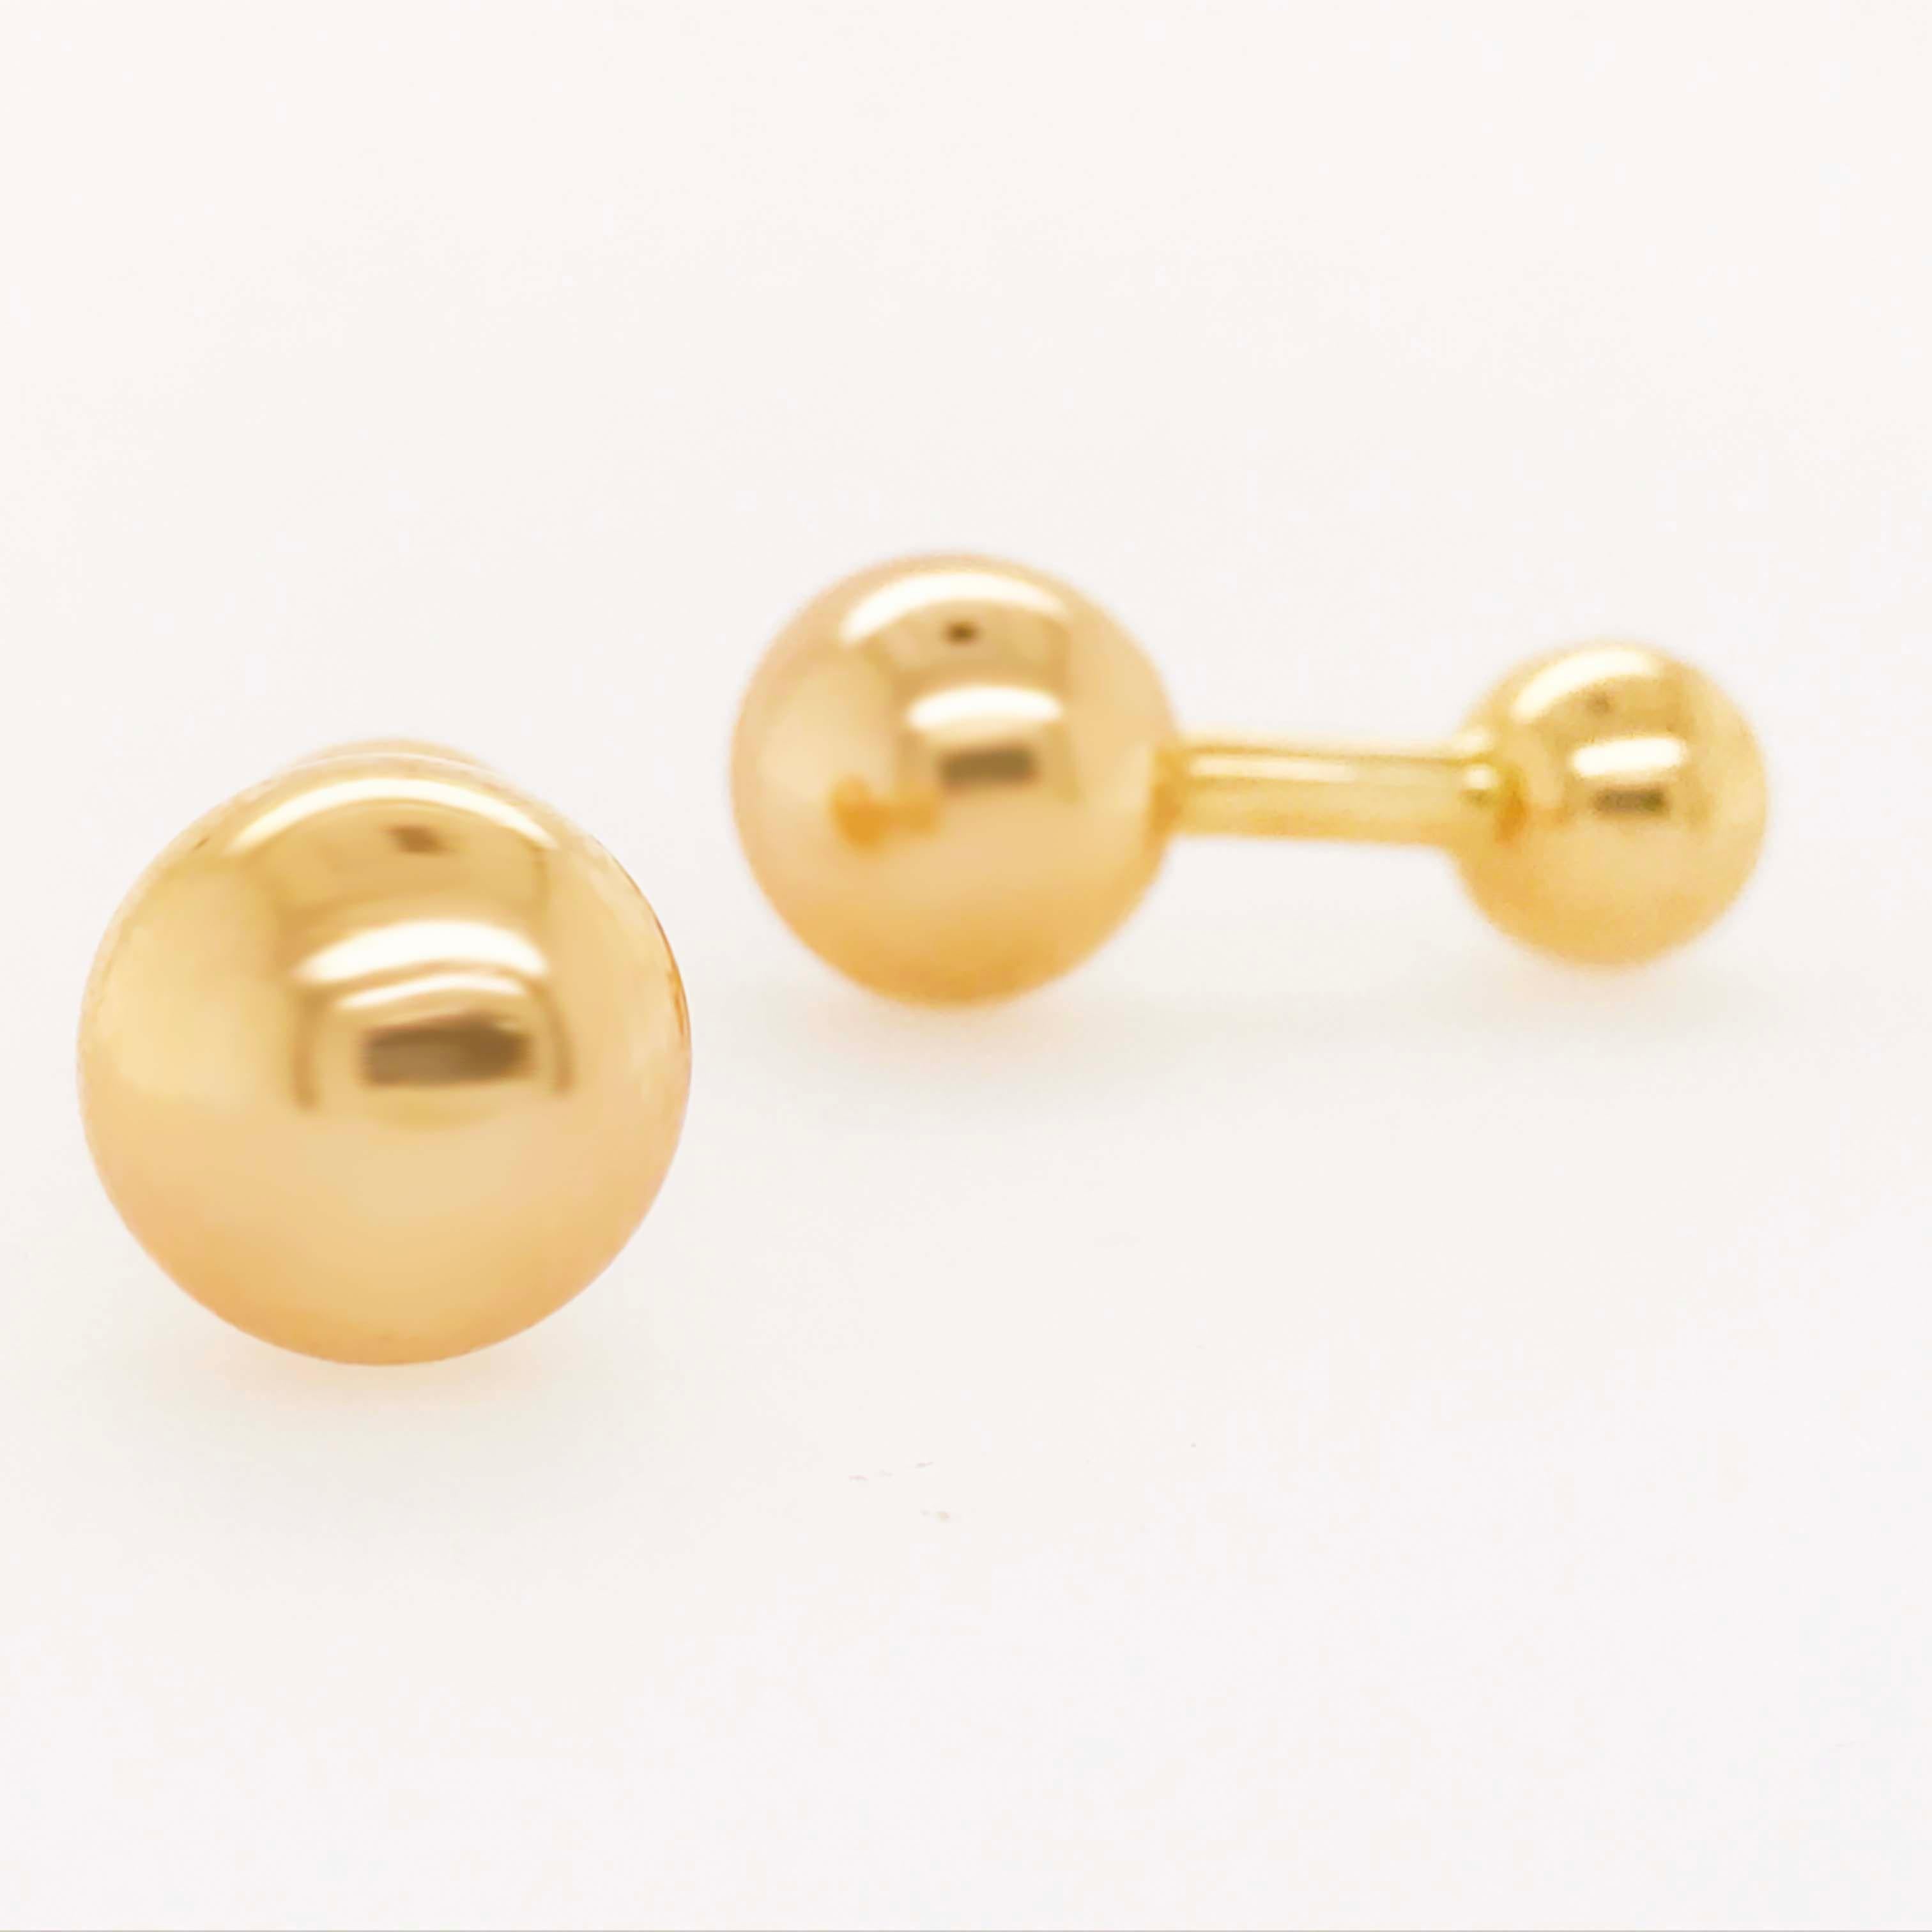 These high polish, gold ball cuff-links are stylish and modern! With a clean, high polish finish on a round gold ball. These men's cuff-links are versatile and go with any formal wear! The 14 karat yellow gold cuff-links were carefully crafted and